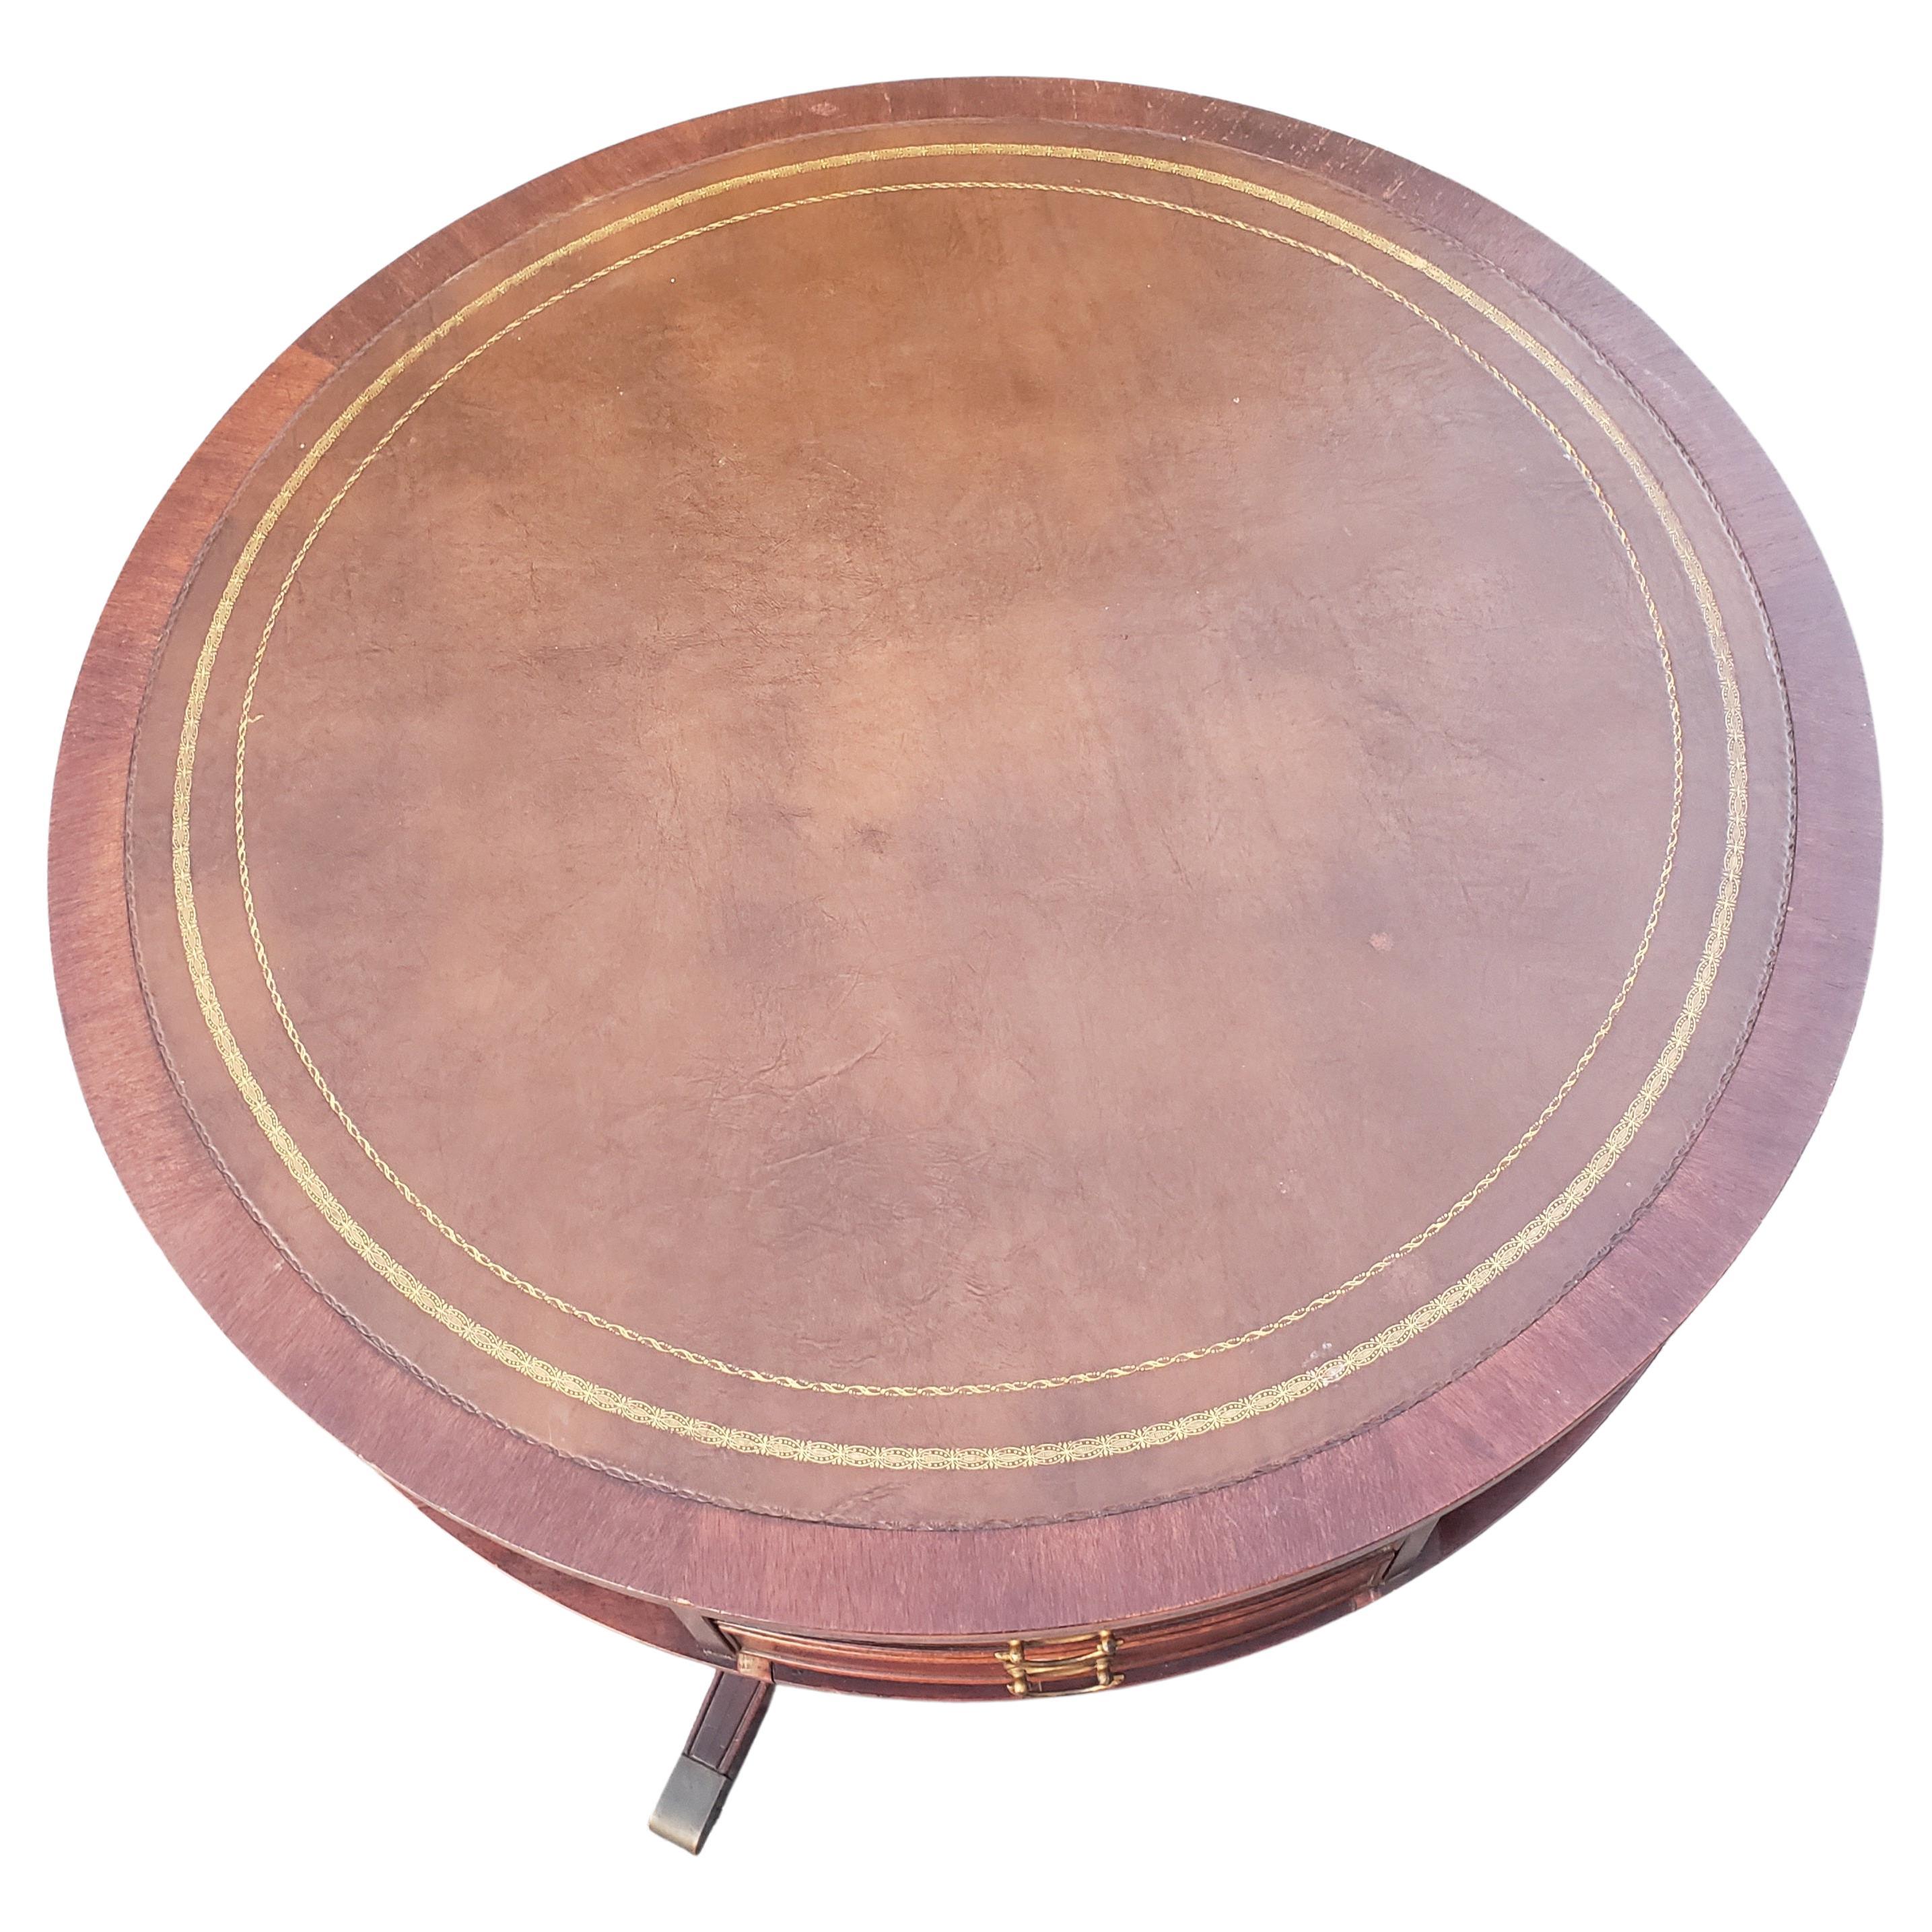 20th Century Banded Leather Stenciled Top Double Drum 4-drawer Mahogany Center Table, C 1940s For Sale